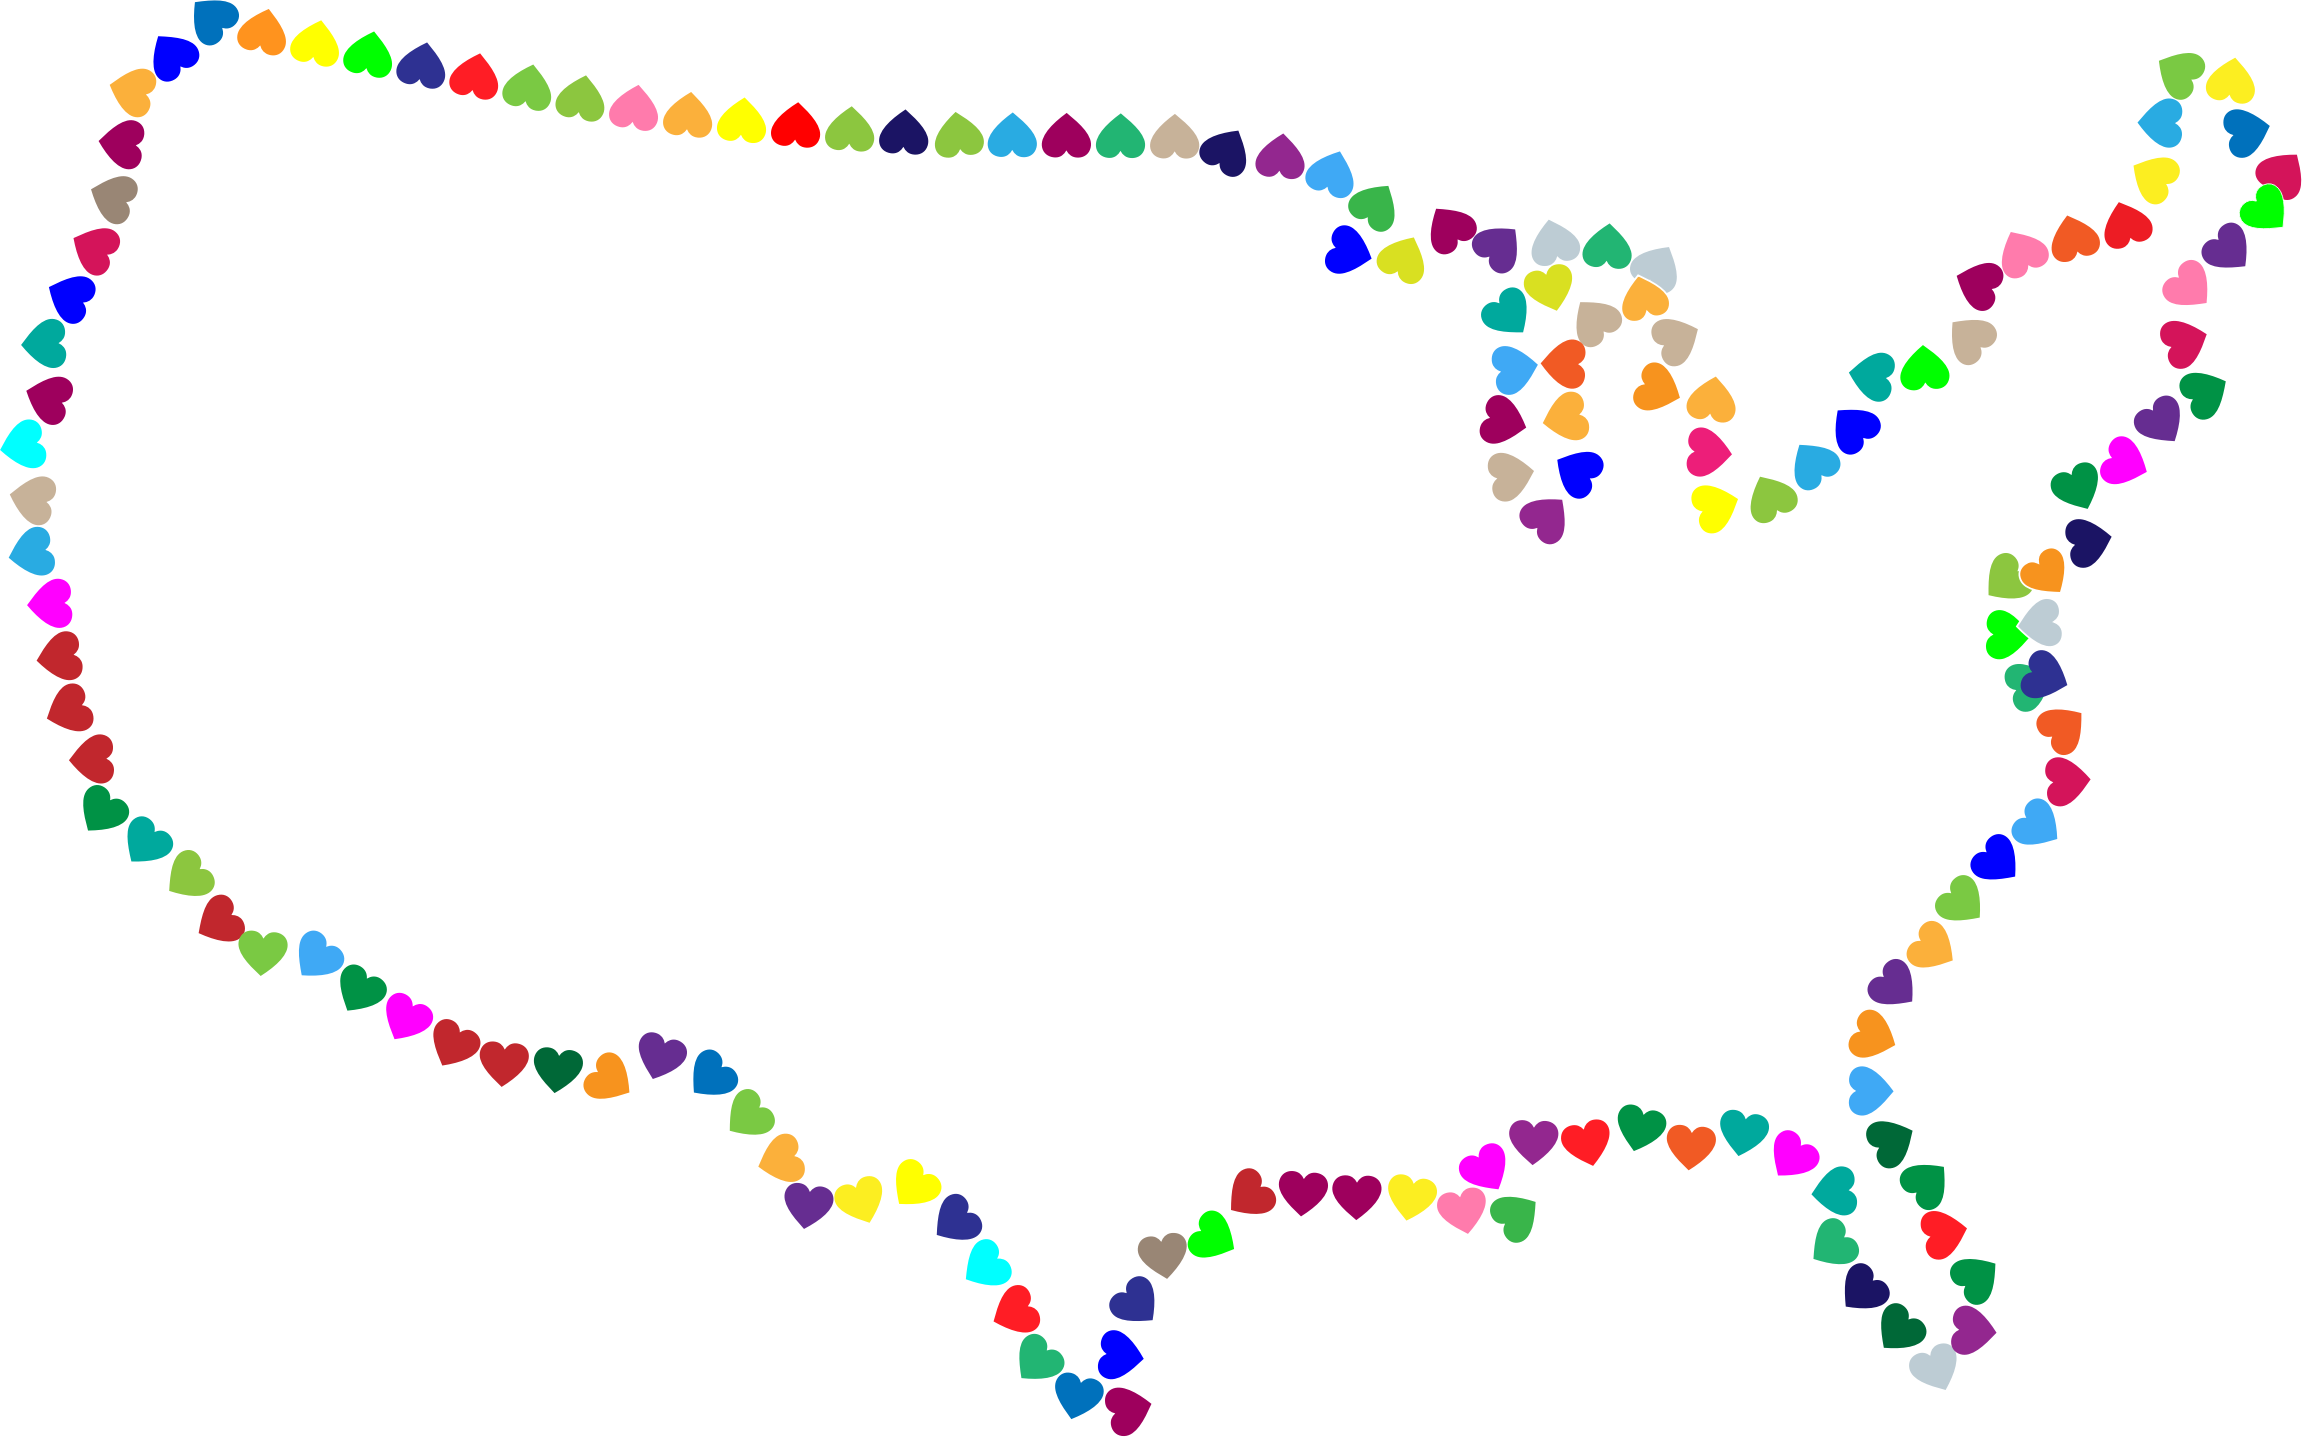 United States Map Clipart Best